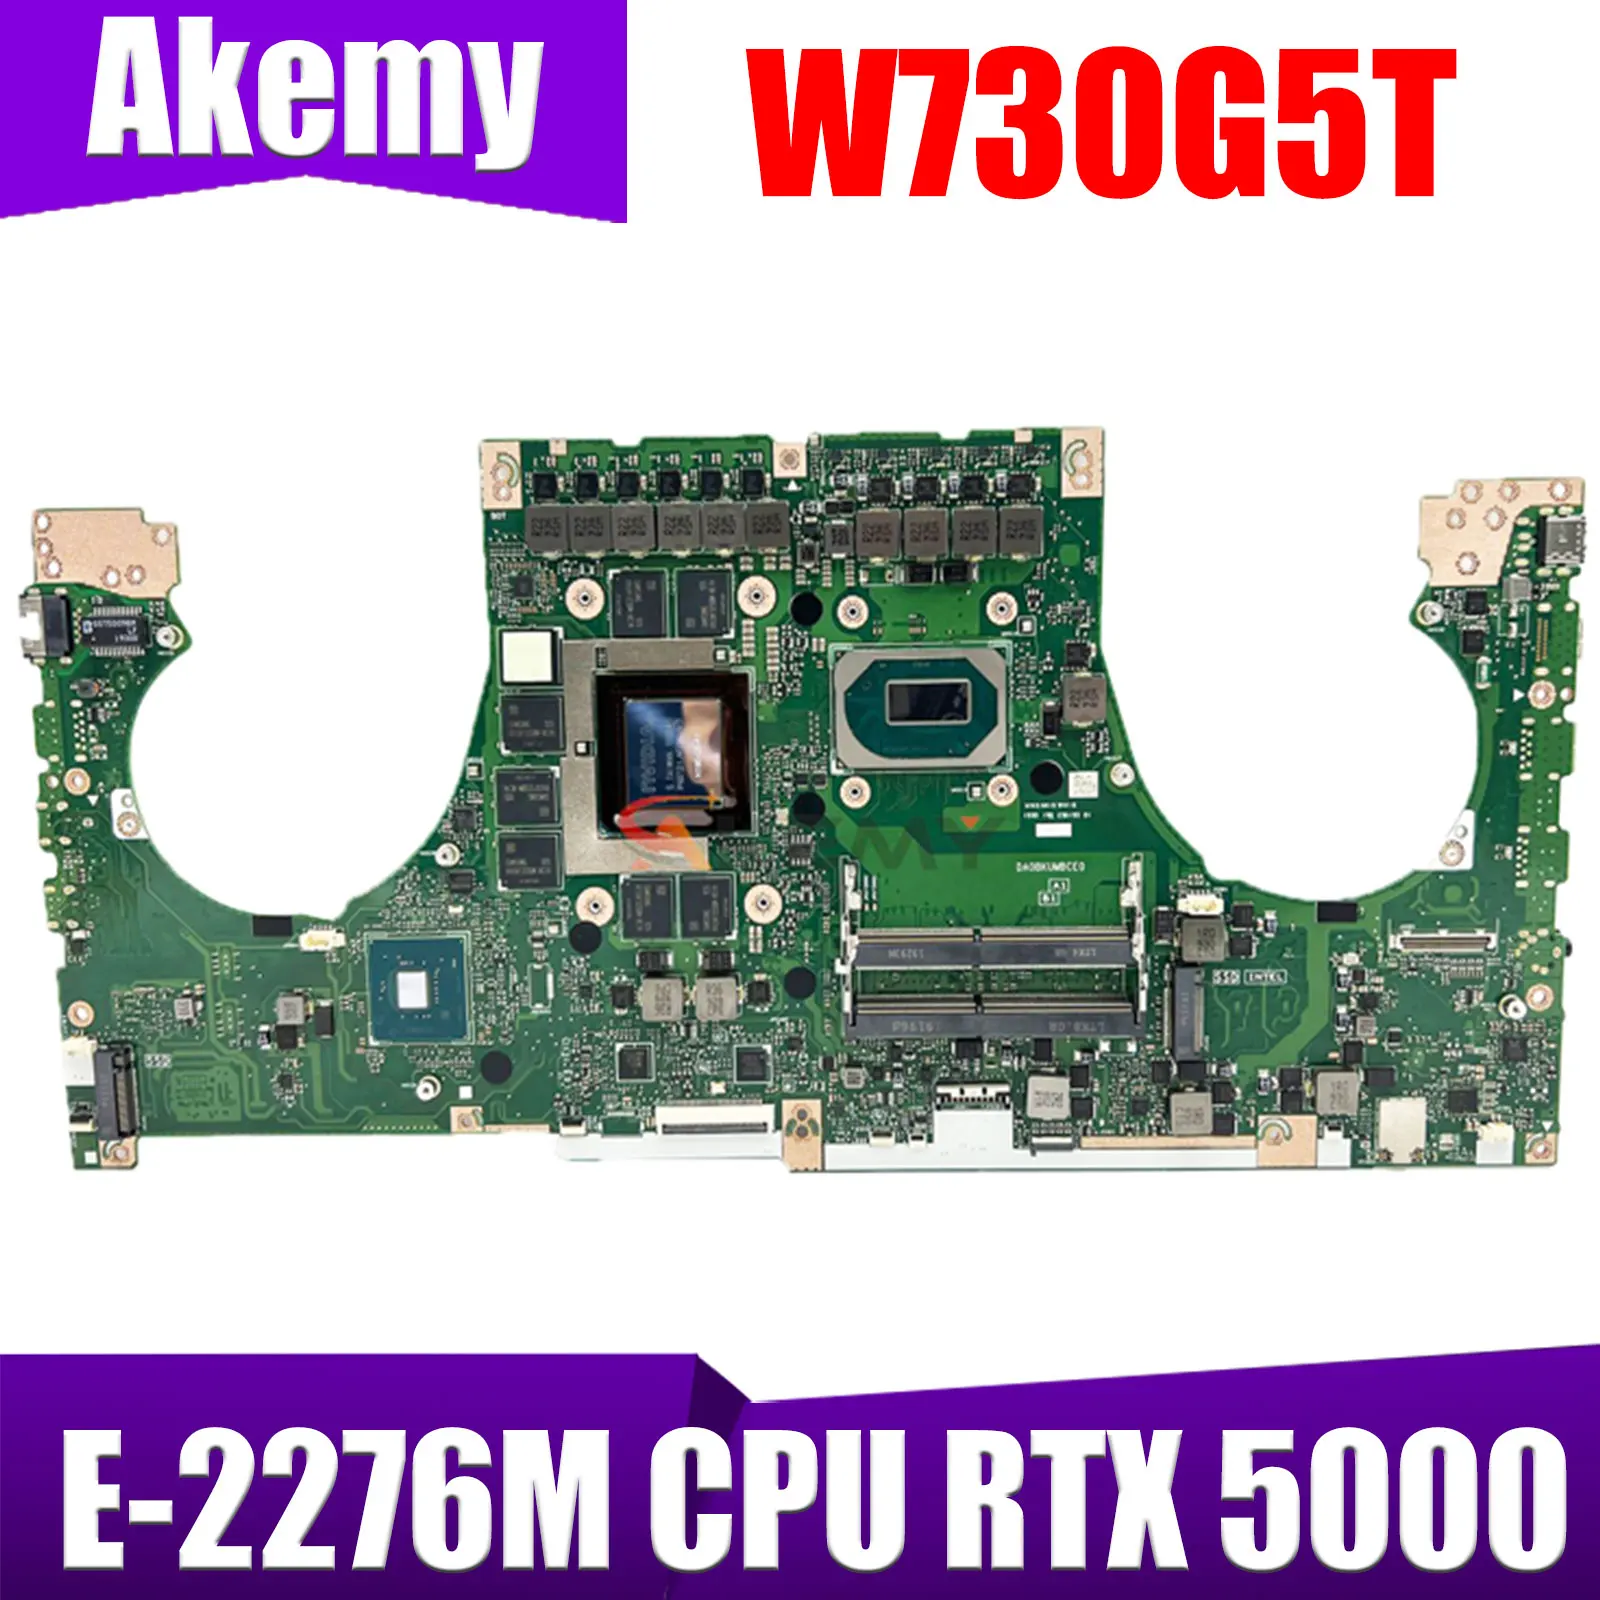 

W730G5T Mainboard For ASUS ProArt StudioBook Pro X W730 W730G5TV Laptop Motherboard With E-2276M CPU RTX 5000 GPU Notebook